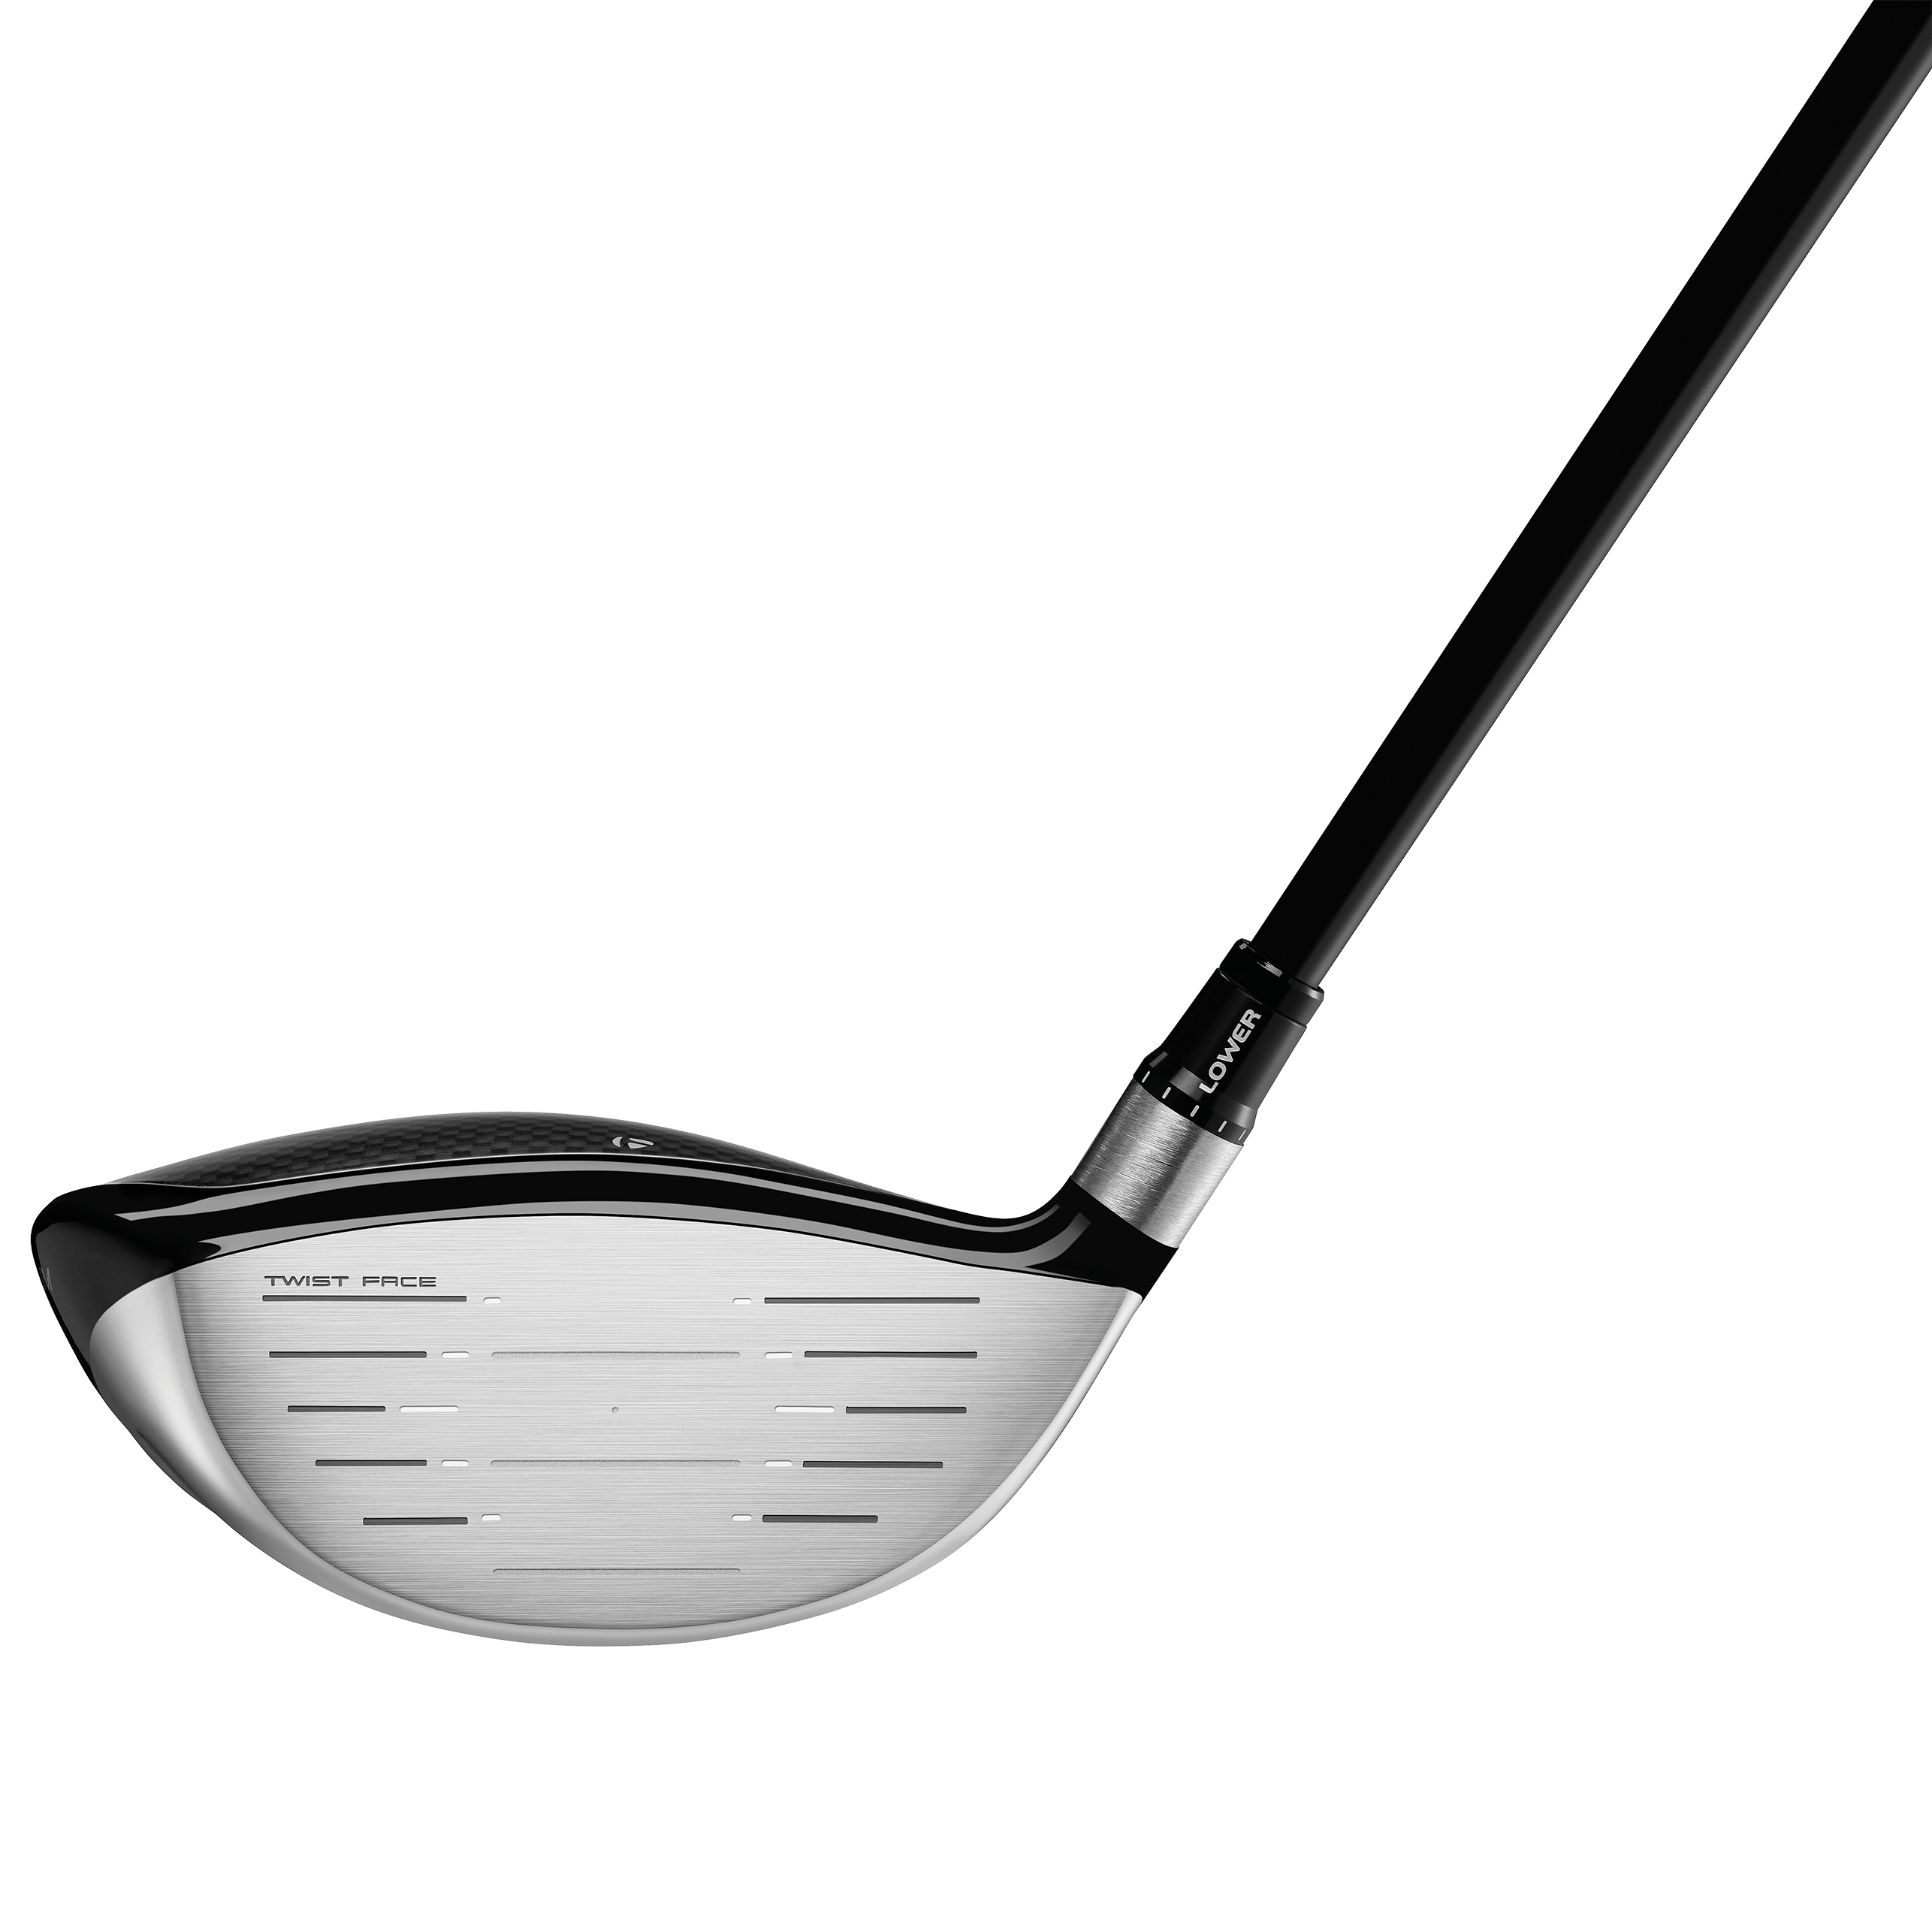 TaylorMade 300 Series Mini Driver · Right handed · Stiff · 11.5°